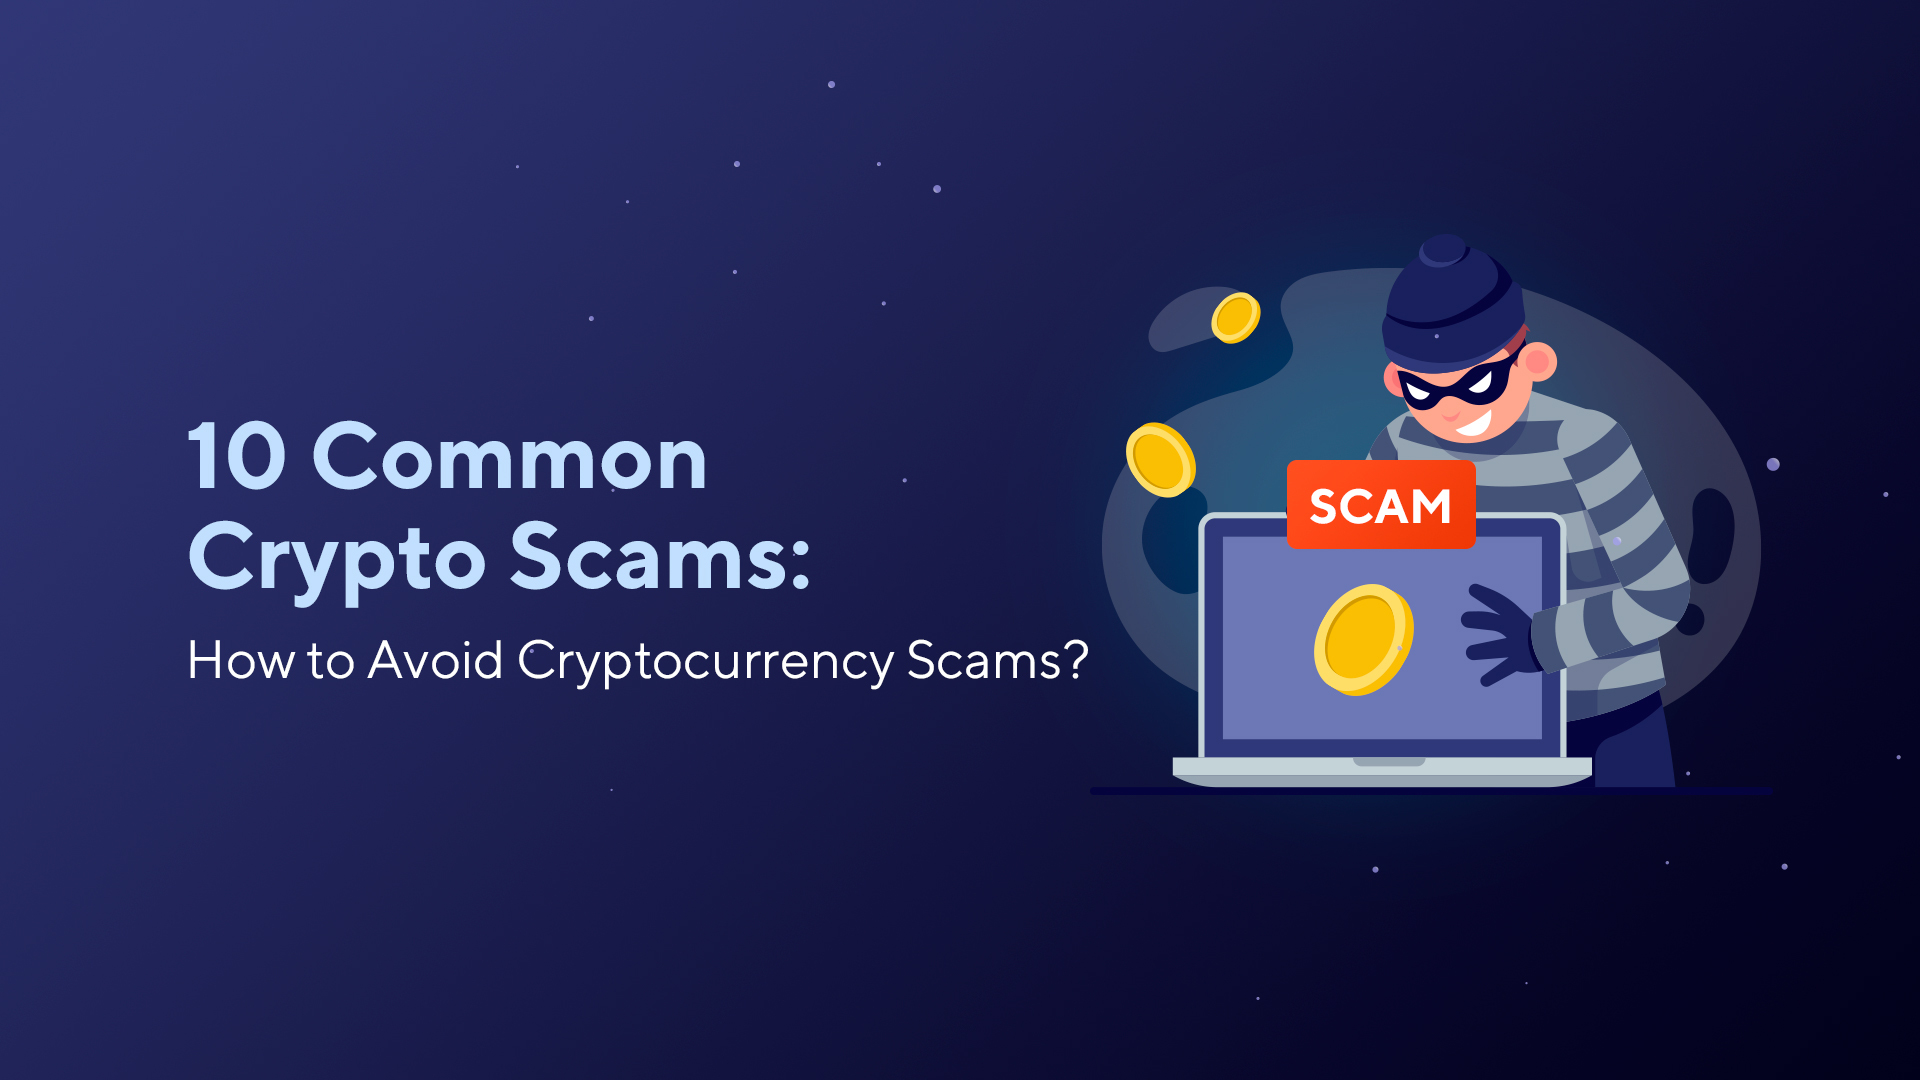 10 Common Crypto Scams: How to Avoid Cryptocurrency Scams?